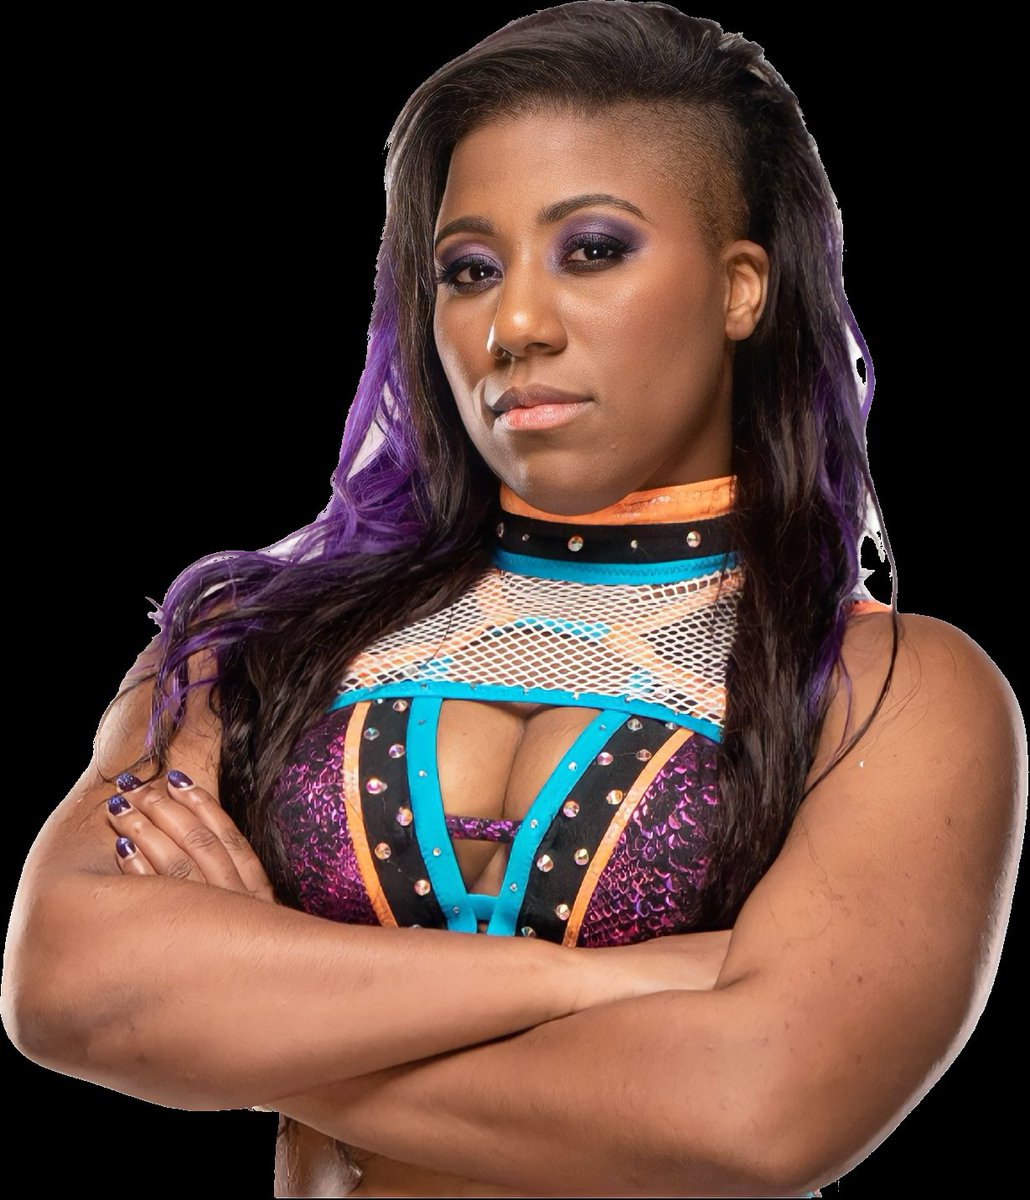 HELLO, PRO WRESTLER. One of the world's top professional wrestlers, Athena, joins us on Thursday, April 4th, at 1 PM for an exclusive seminar for all trained pros at Catchpoint Philadelphia!